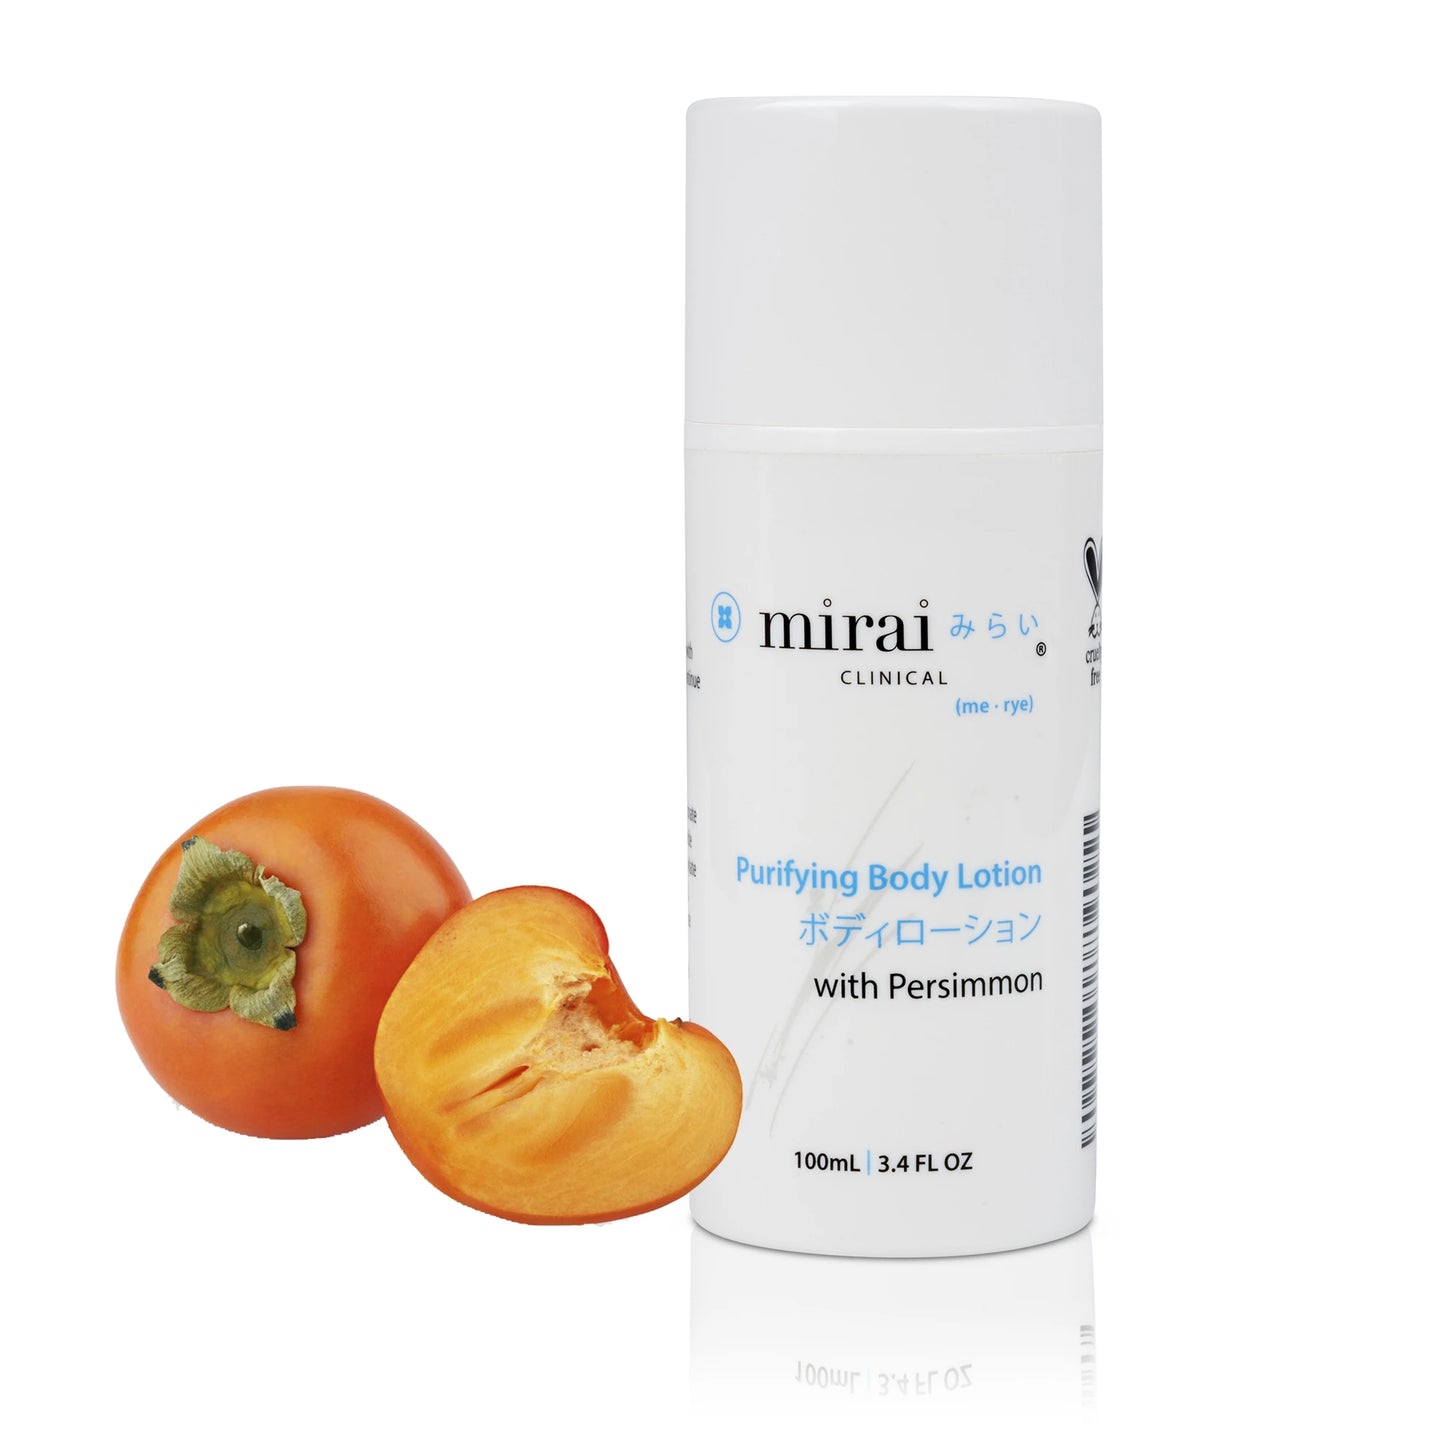 Front view of Mirai Clinical's Purifying Body Lotion bottle, enriched with the natural benefits of persimmon extract, specially formulated to offer deep hydration and effectively neutralize nonenal body odor.